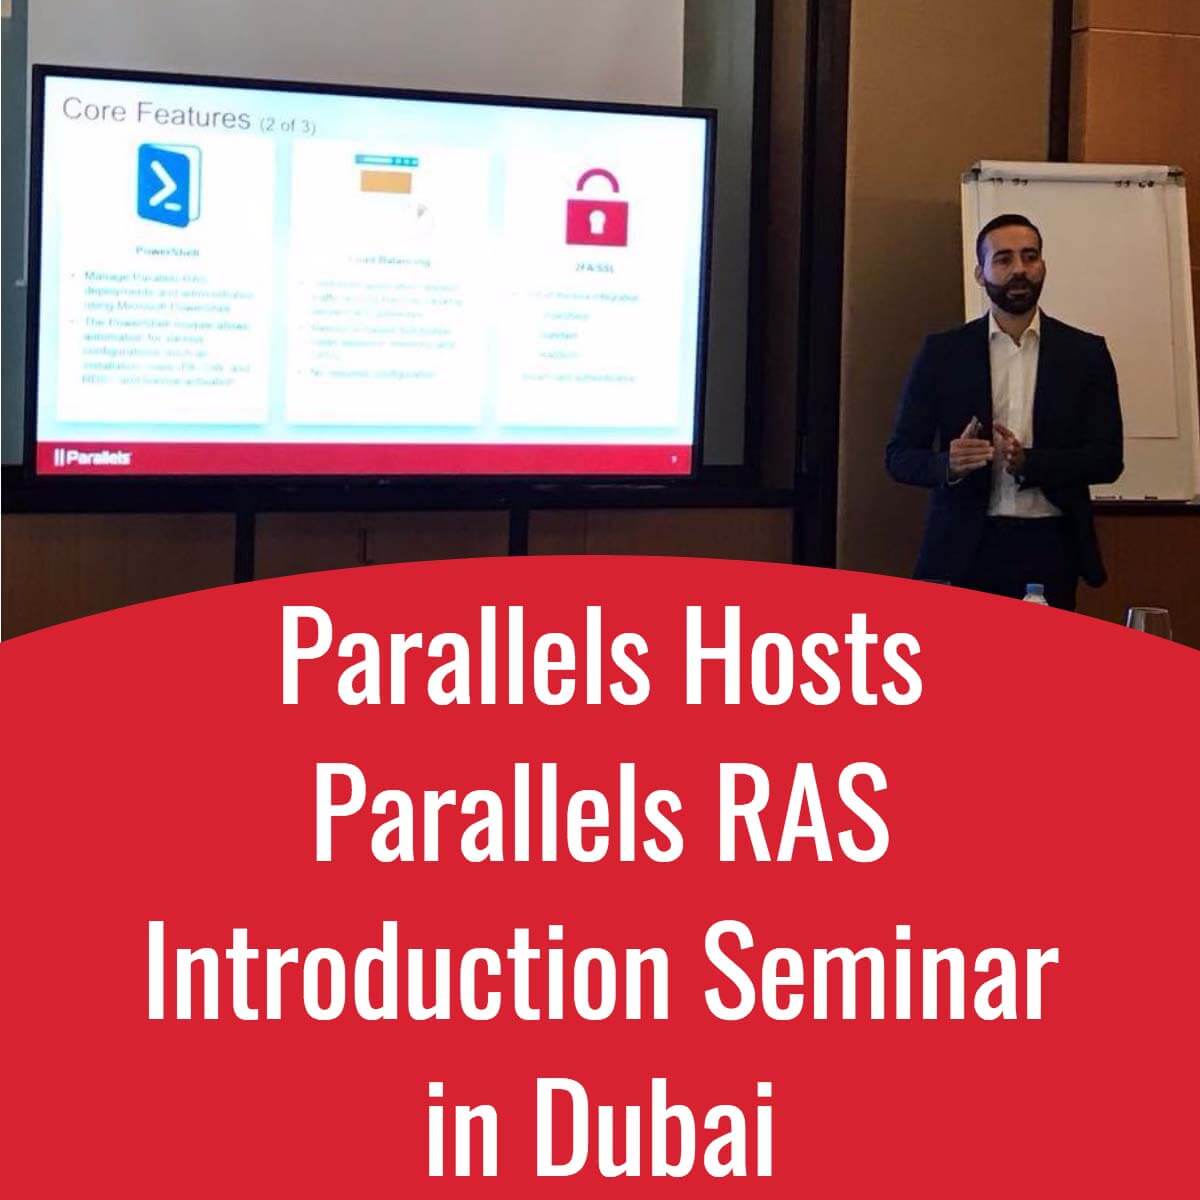 Parallels Hosts Parallels RAS Introduction Seminar in Dubai